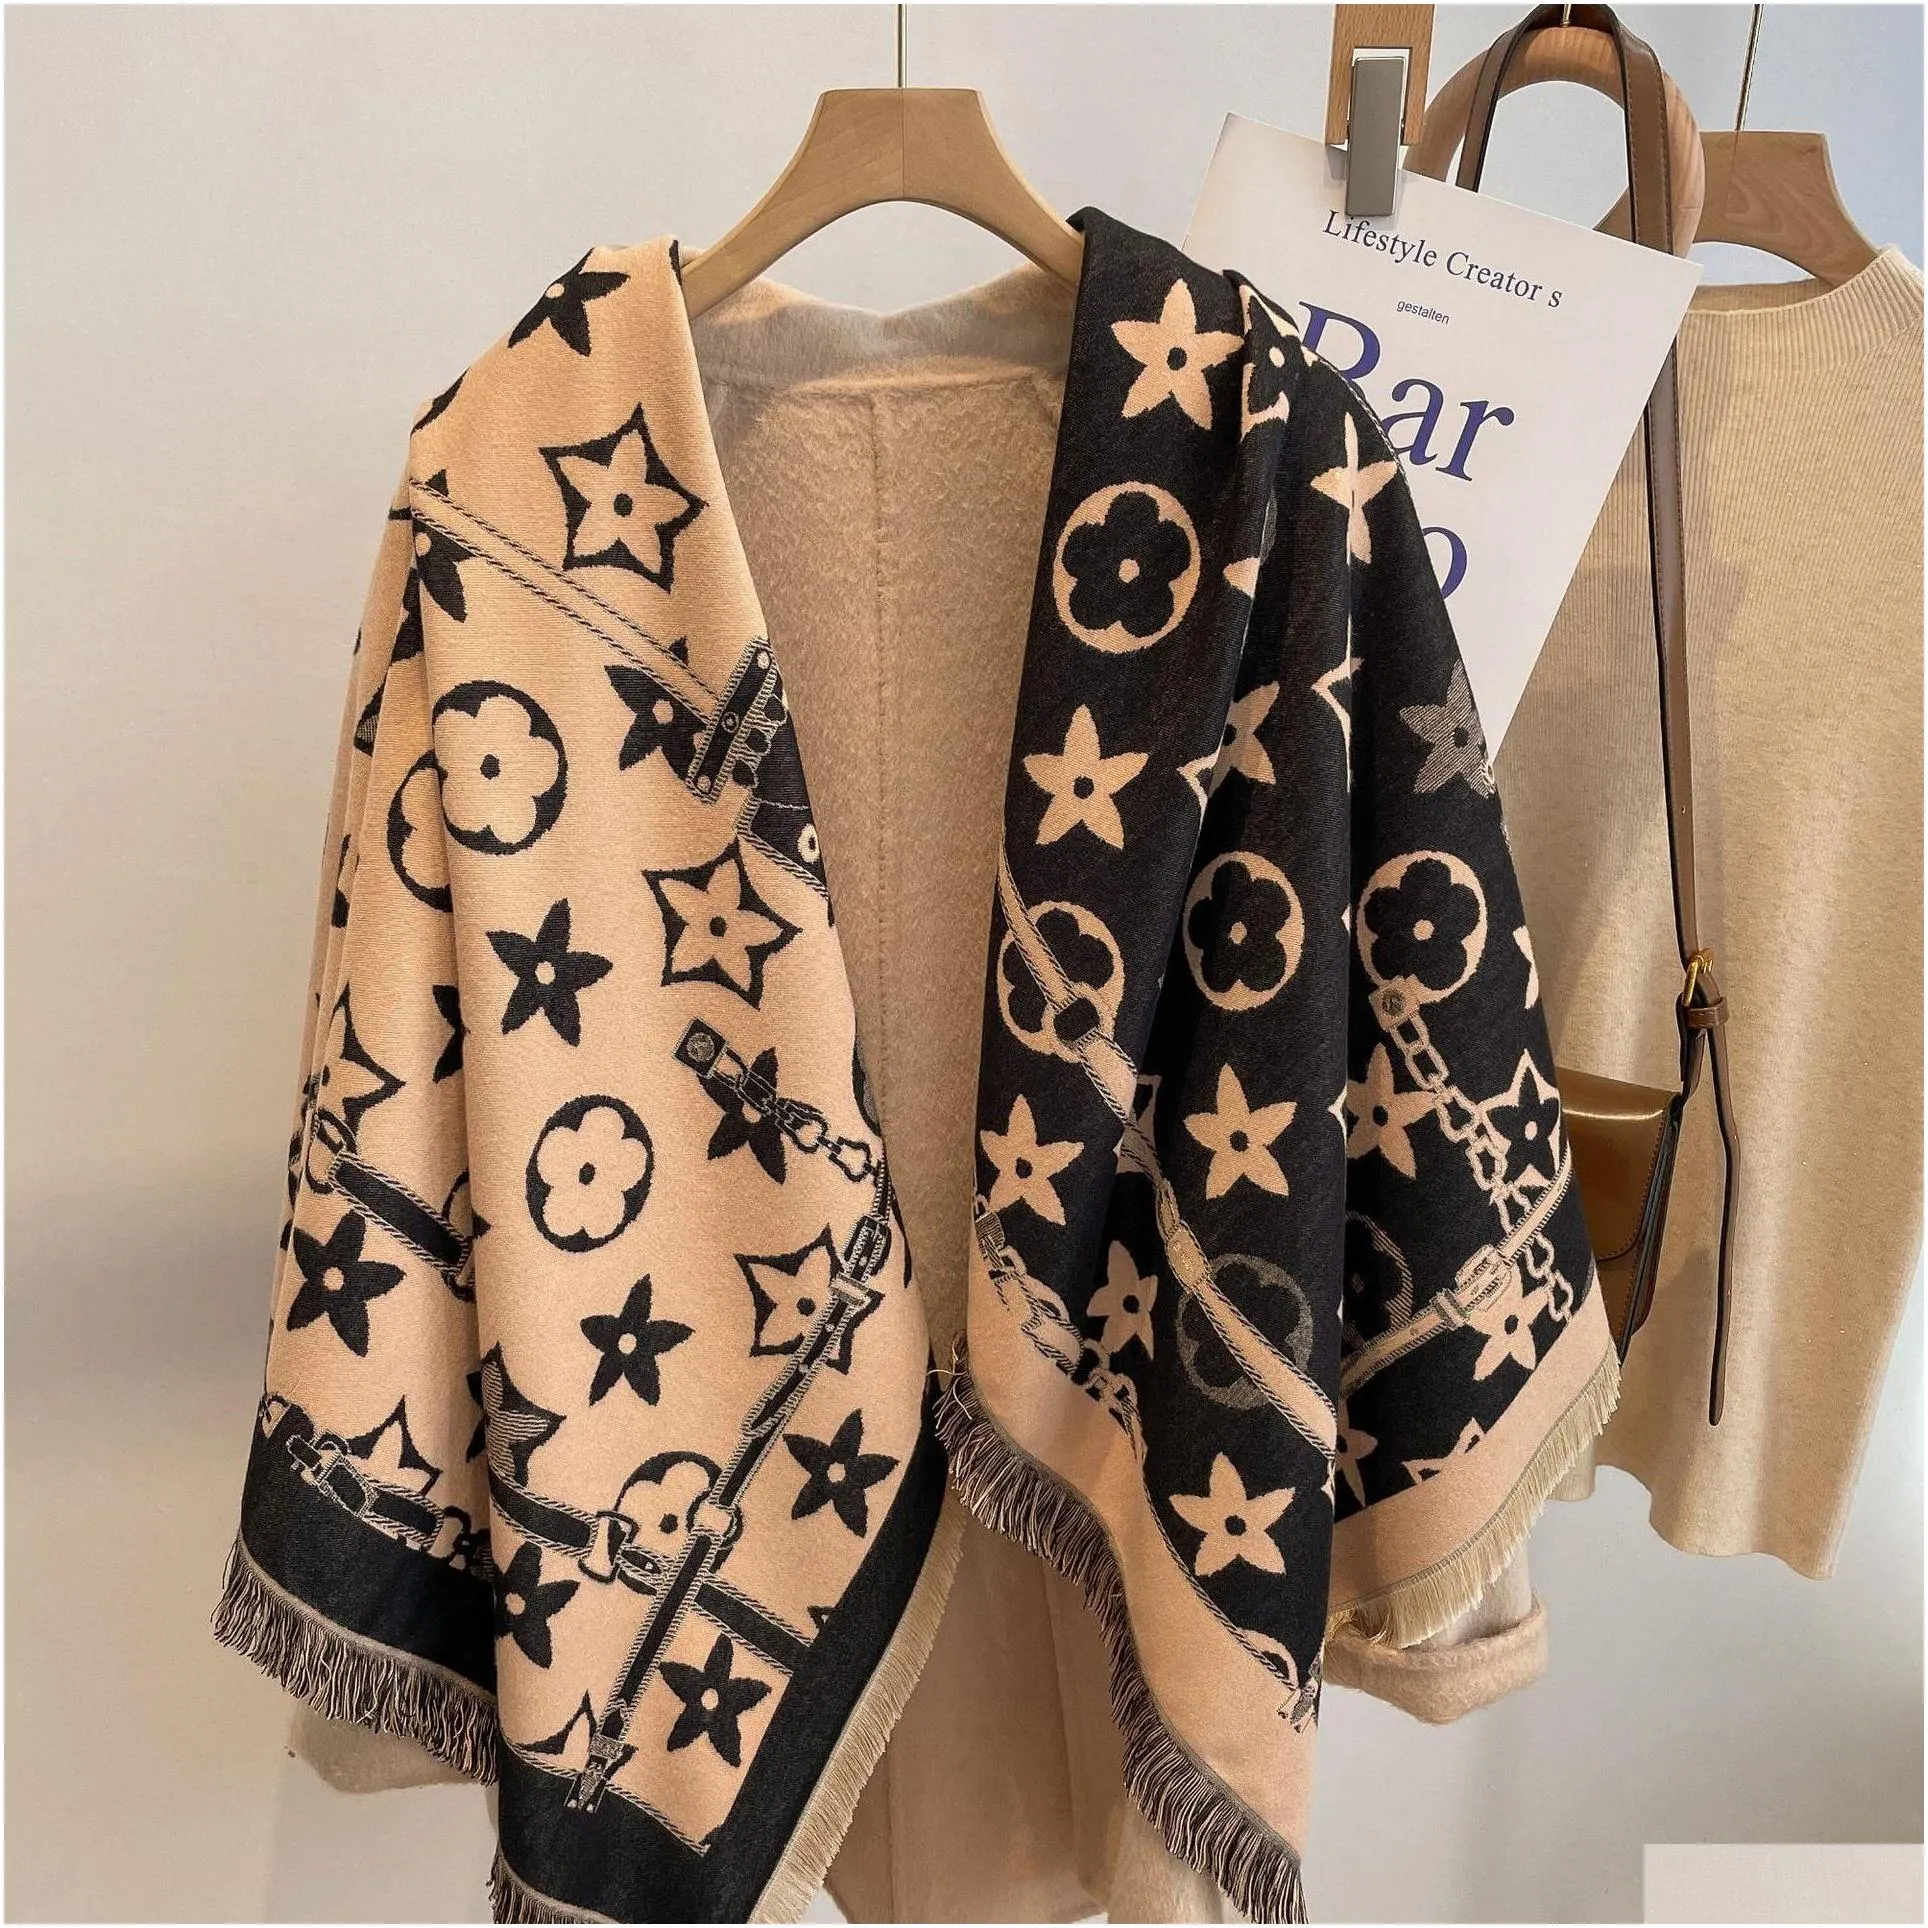 2022 top women man designer scarf fashion brand 100% cashmere scarves for winter womens and mens long wraps size 128x122cm gift